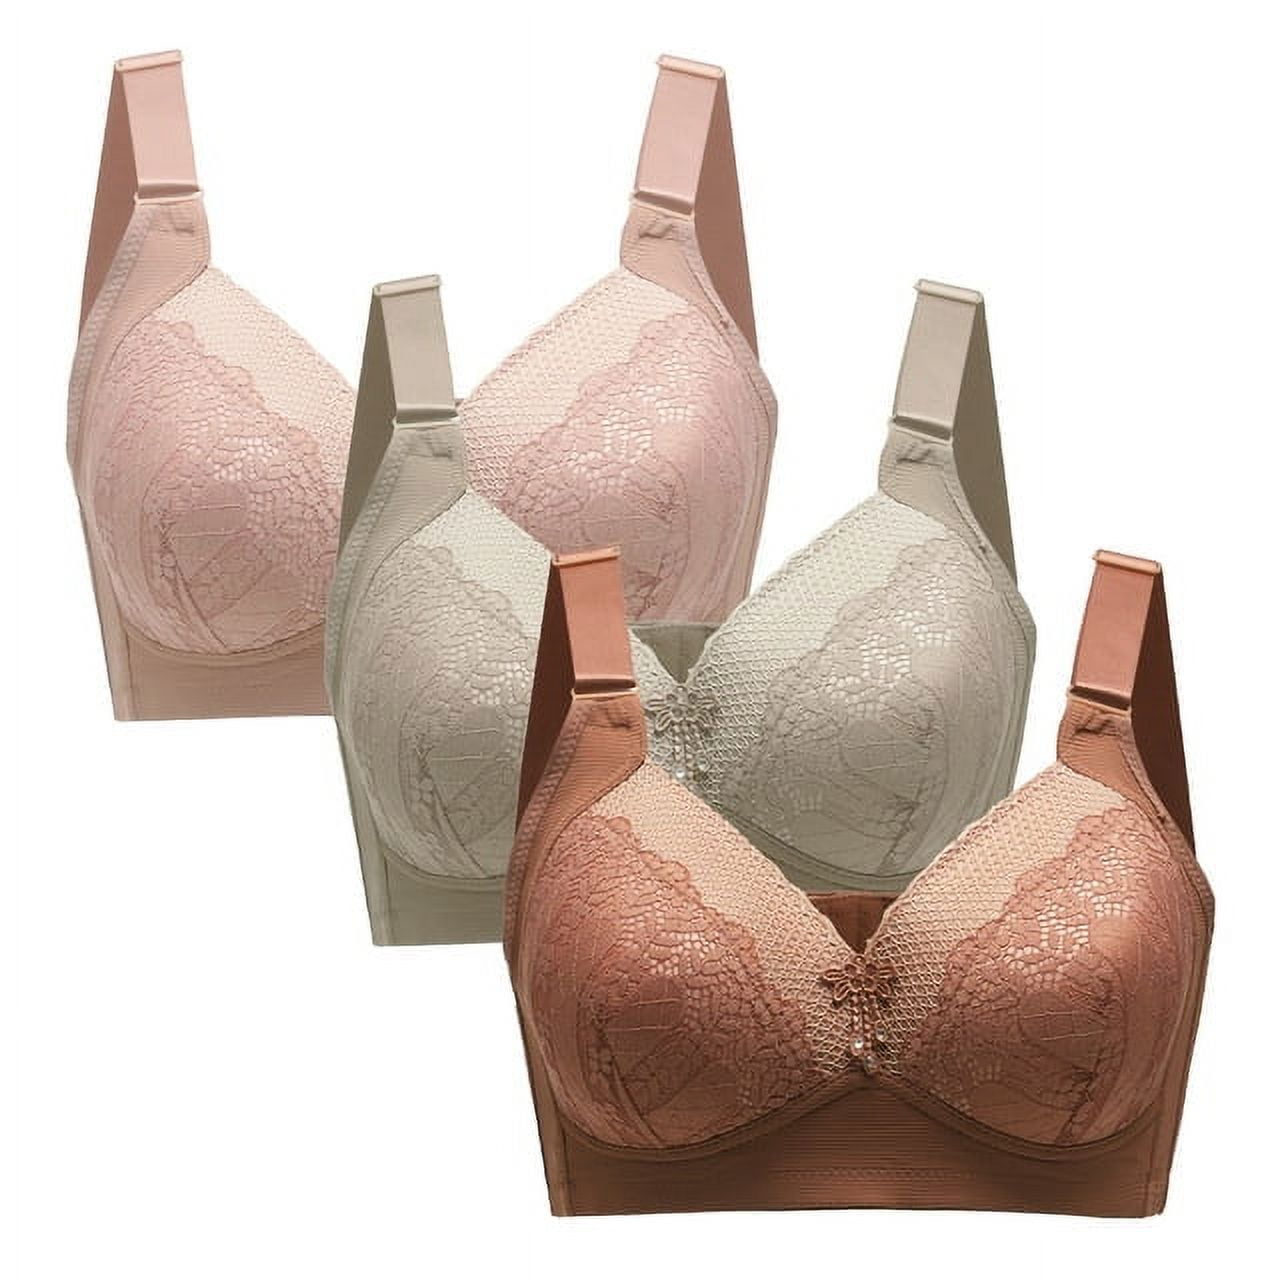 Underwire & Wired Bras in the size 3AA for Women on sale